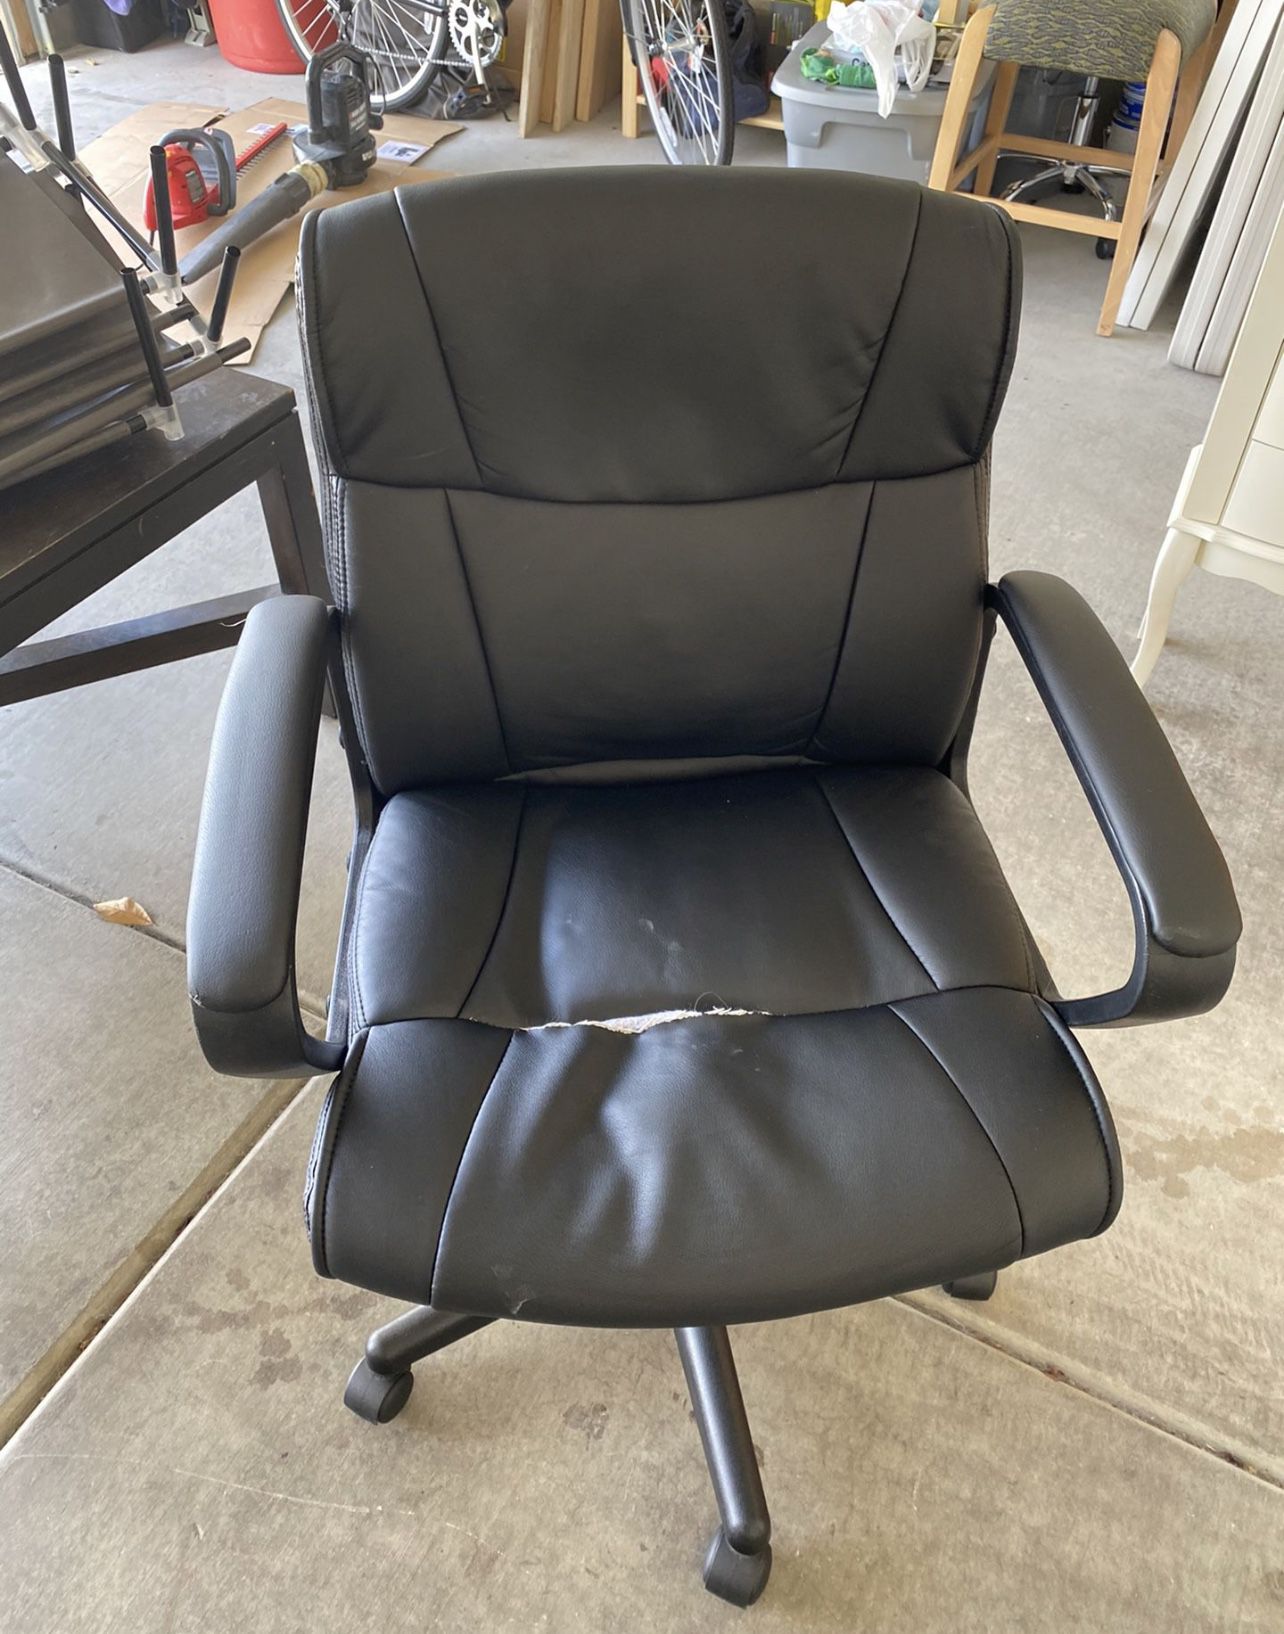 Office chair, great for work from home!